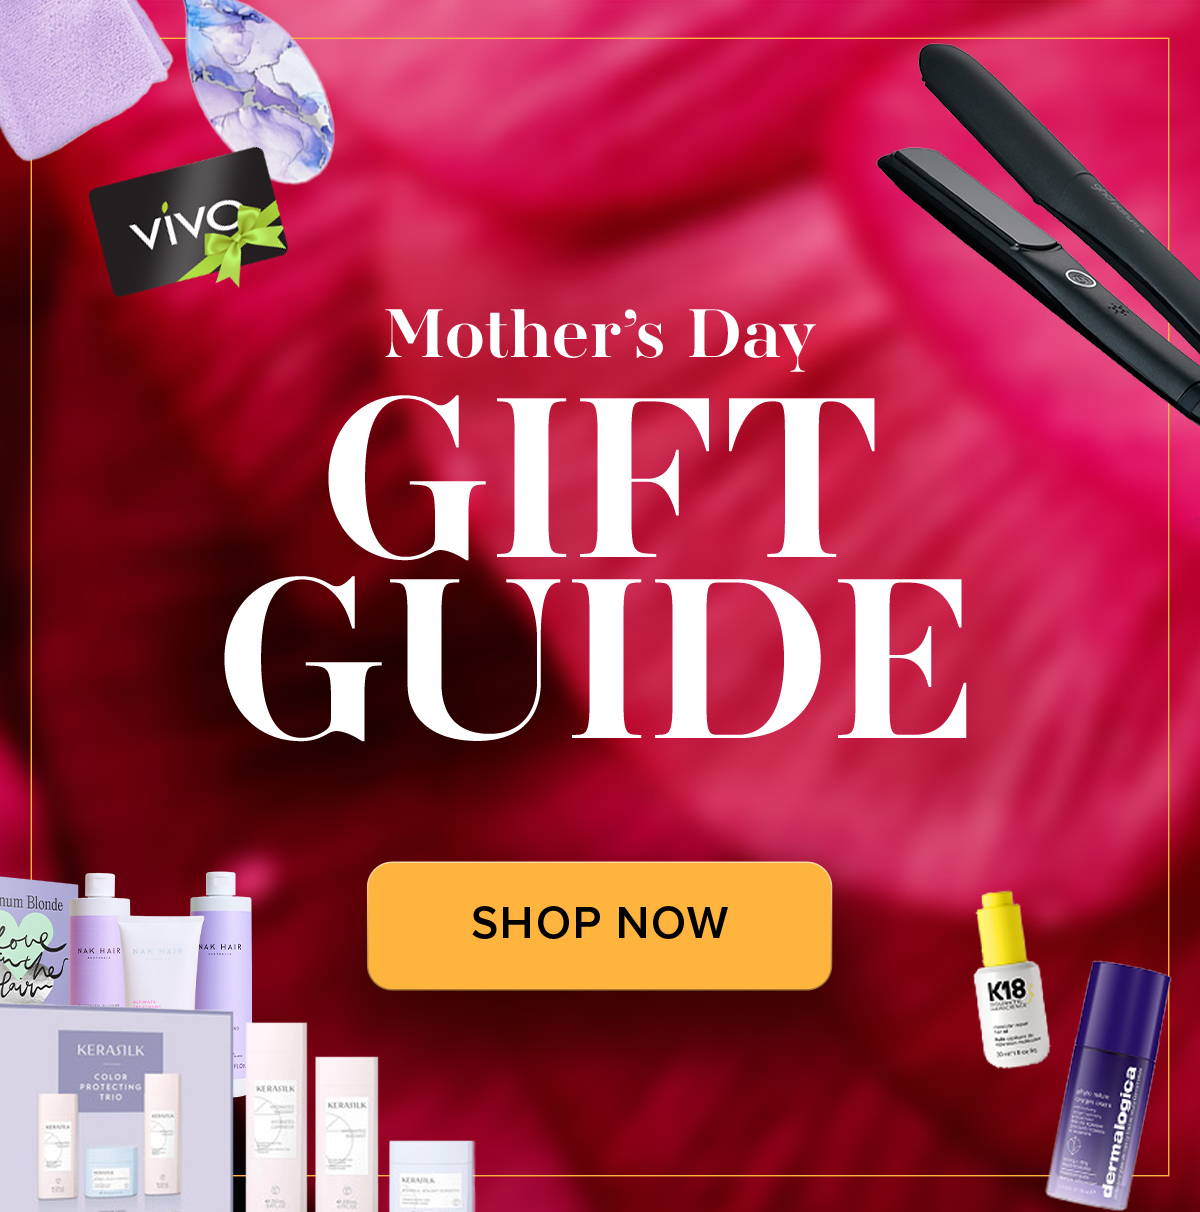 Mother's Day Gift Ideas at Vivo Online Store